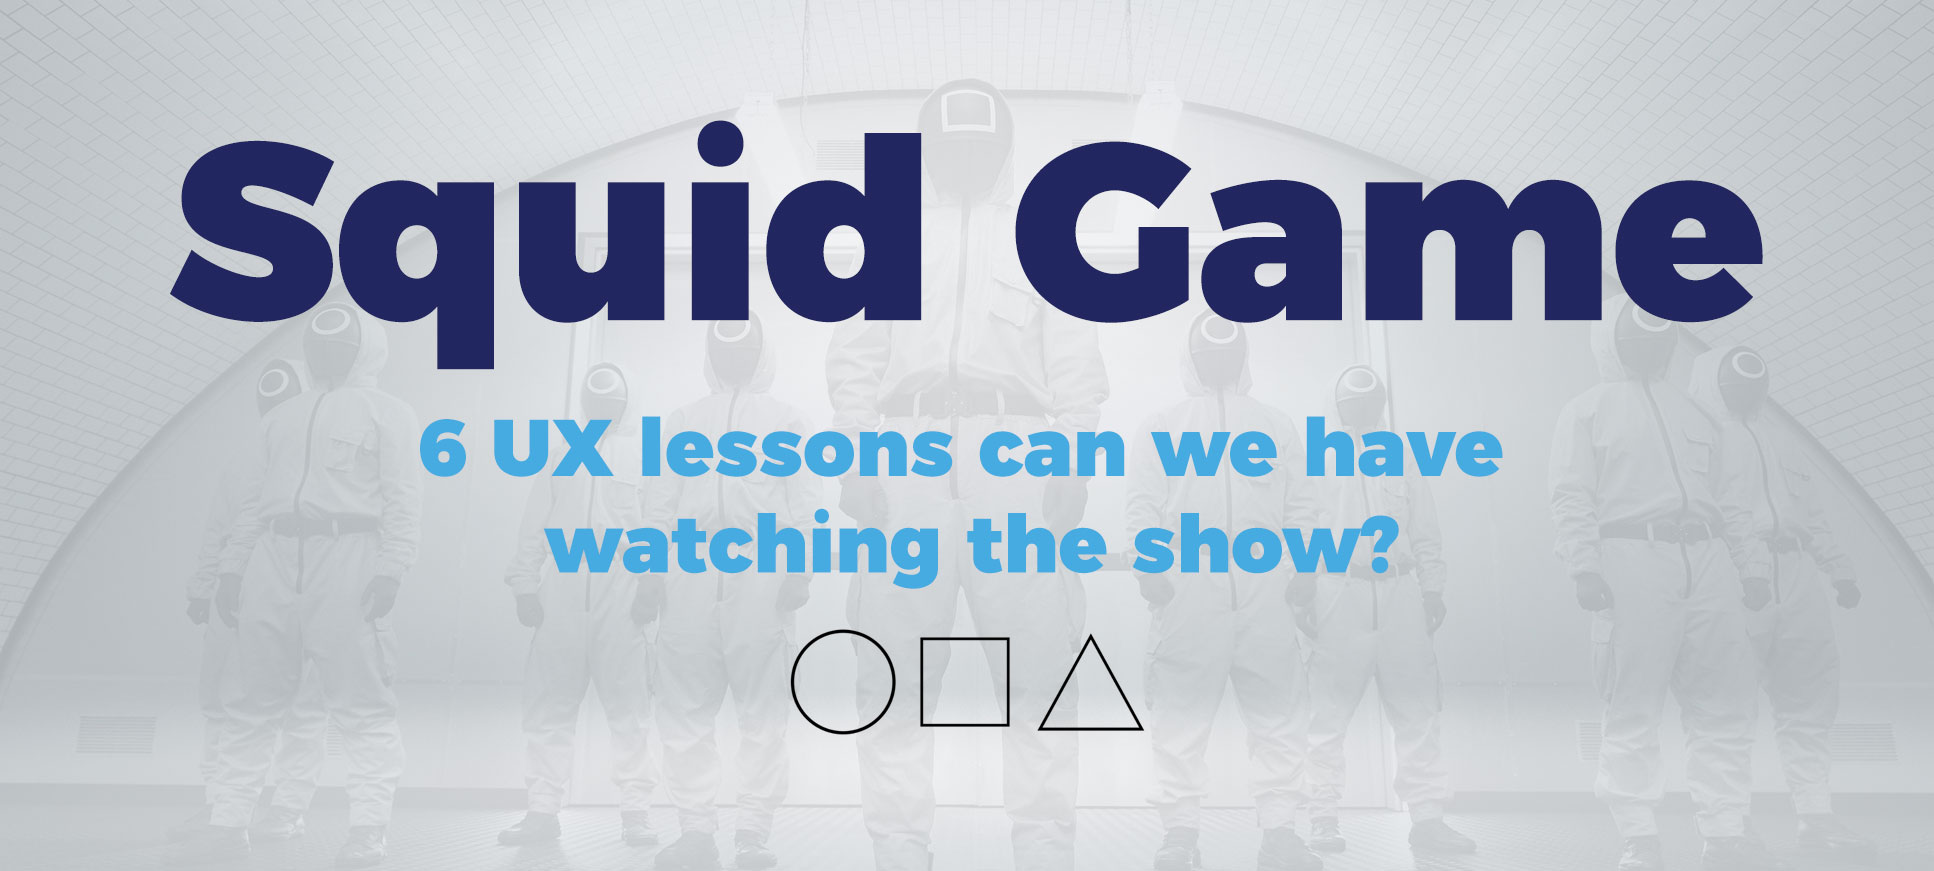 Squid Game - 6 UX lessons we can have watching the show